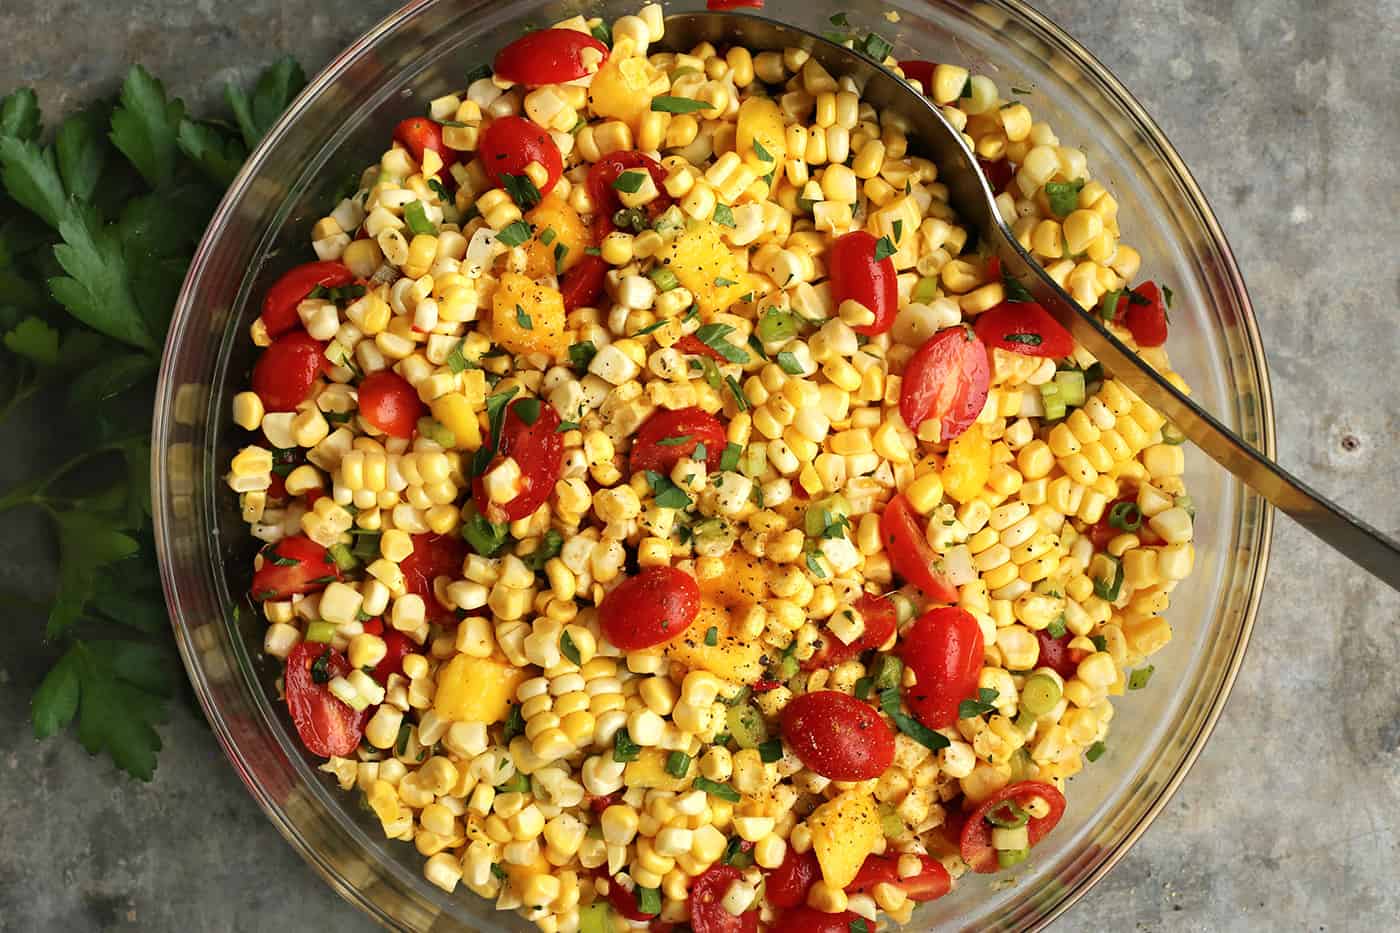 Sweet corn salad with tomato and mango in a glass bowl